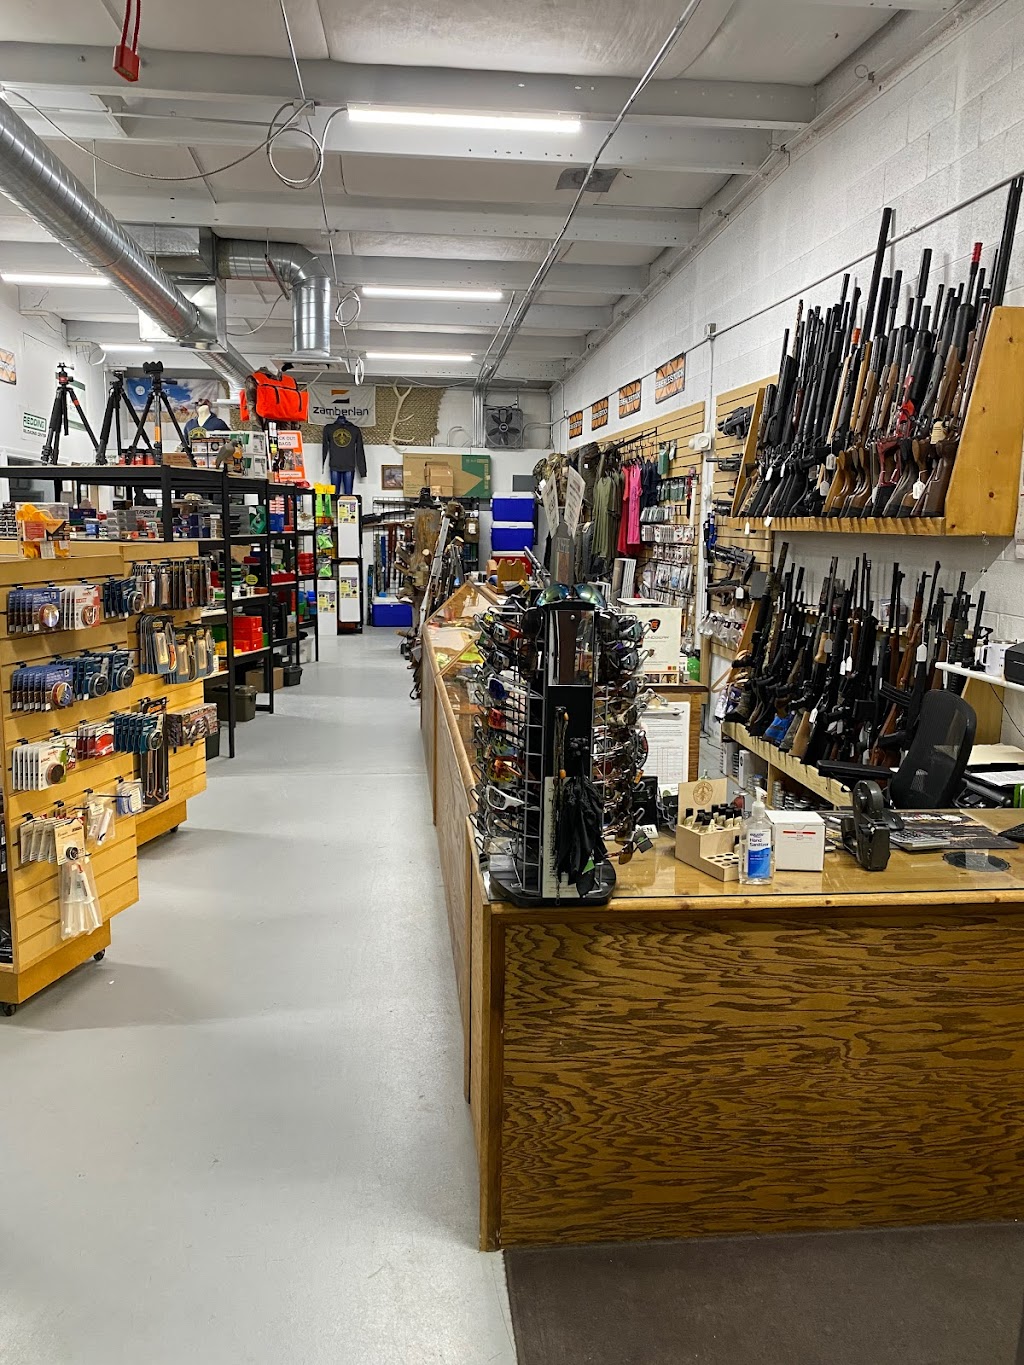 Shooters Bench | 222 W Railroad St, Nampa, ID 83687 | Phone: (208) 442-4422